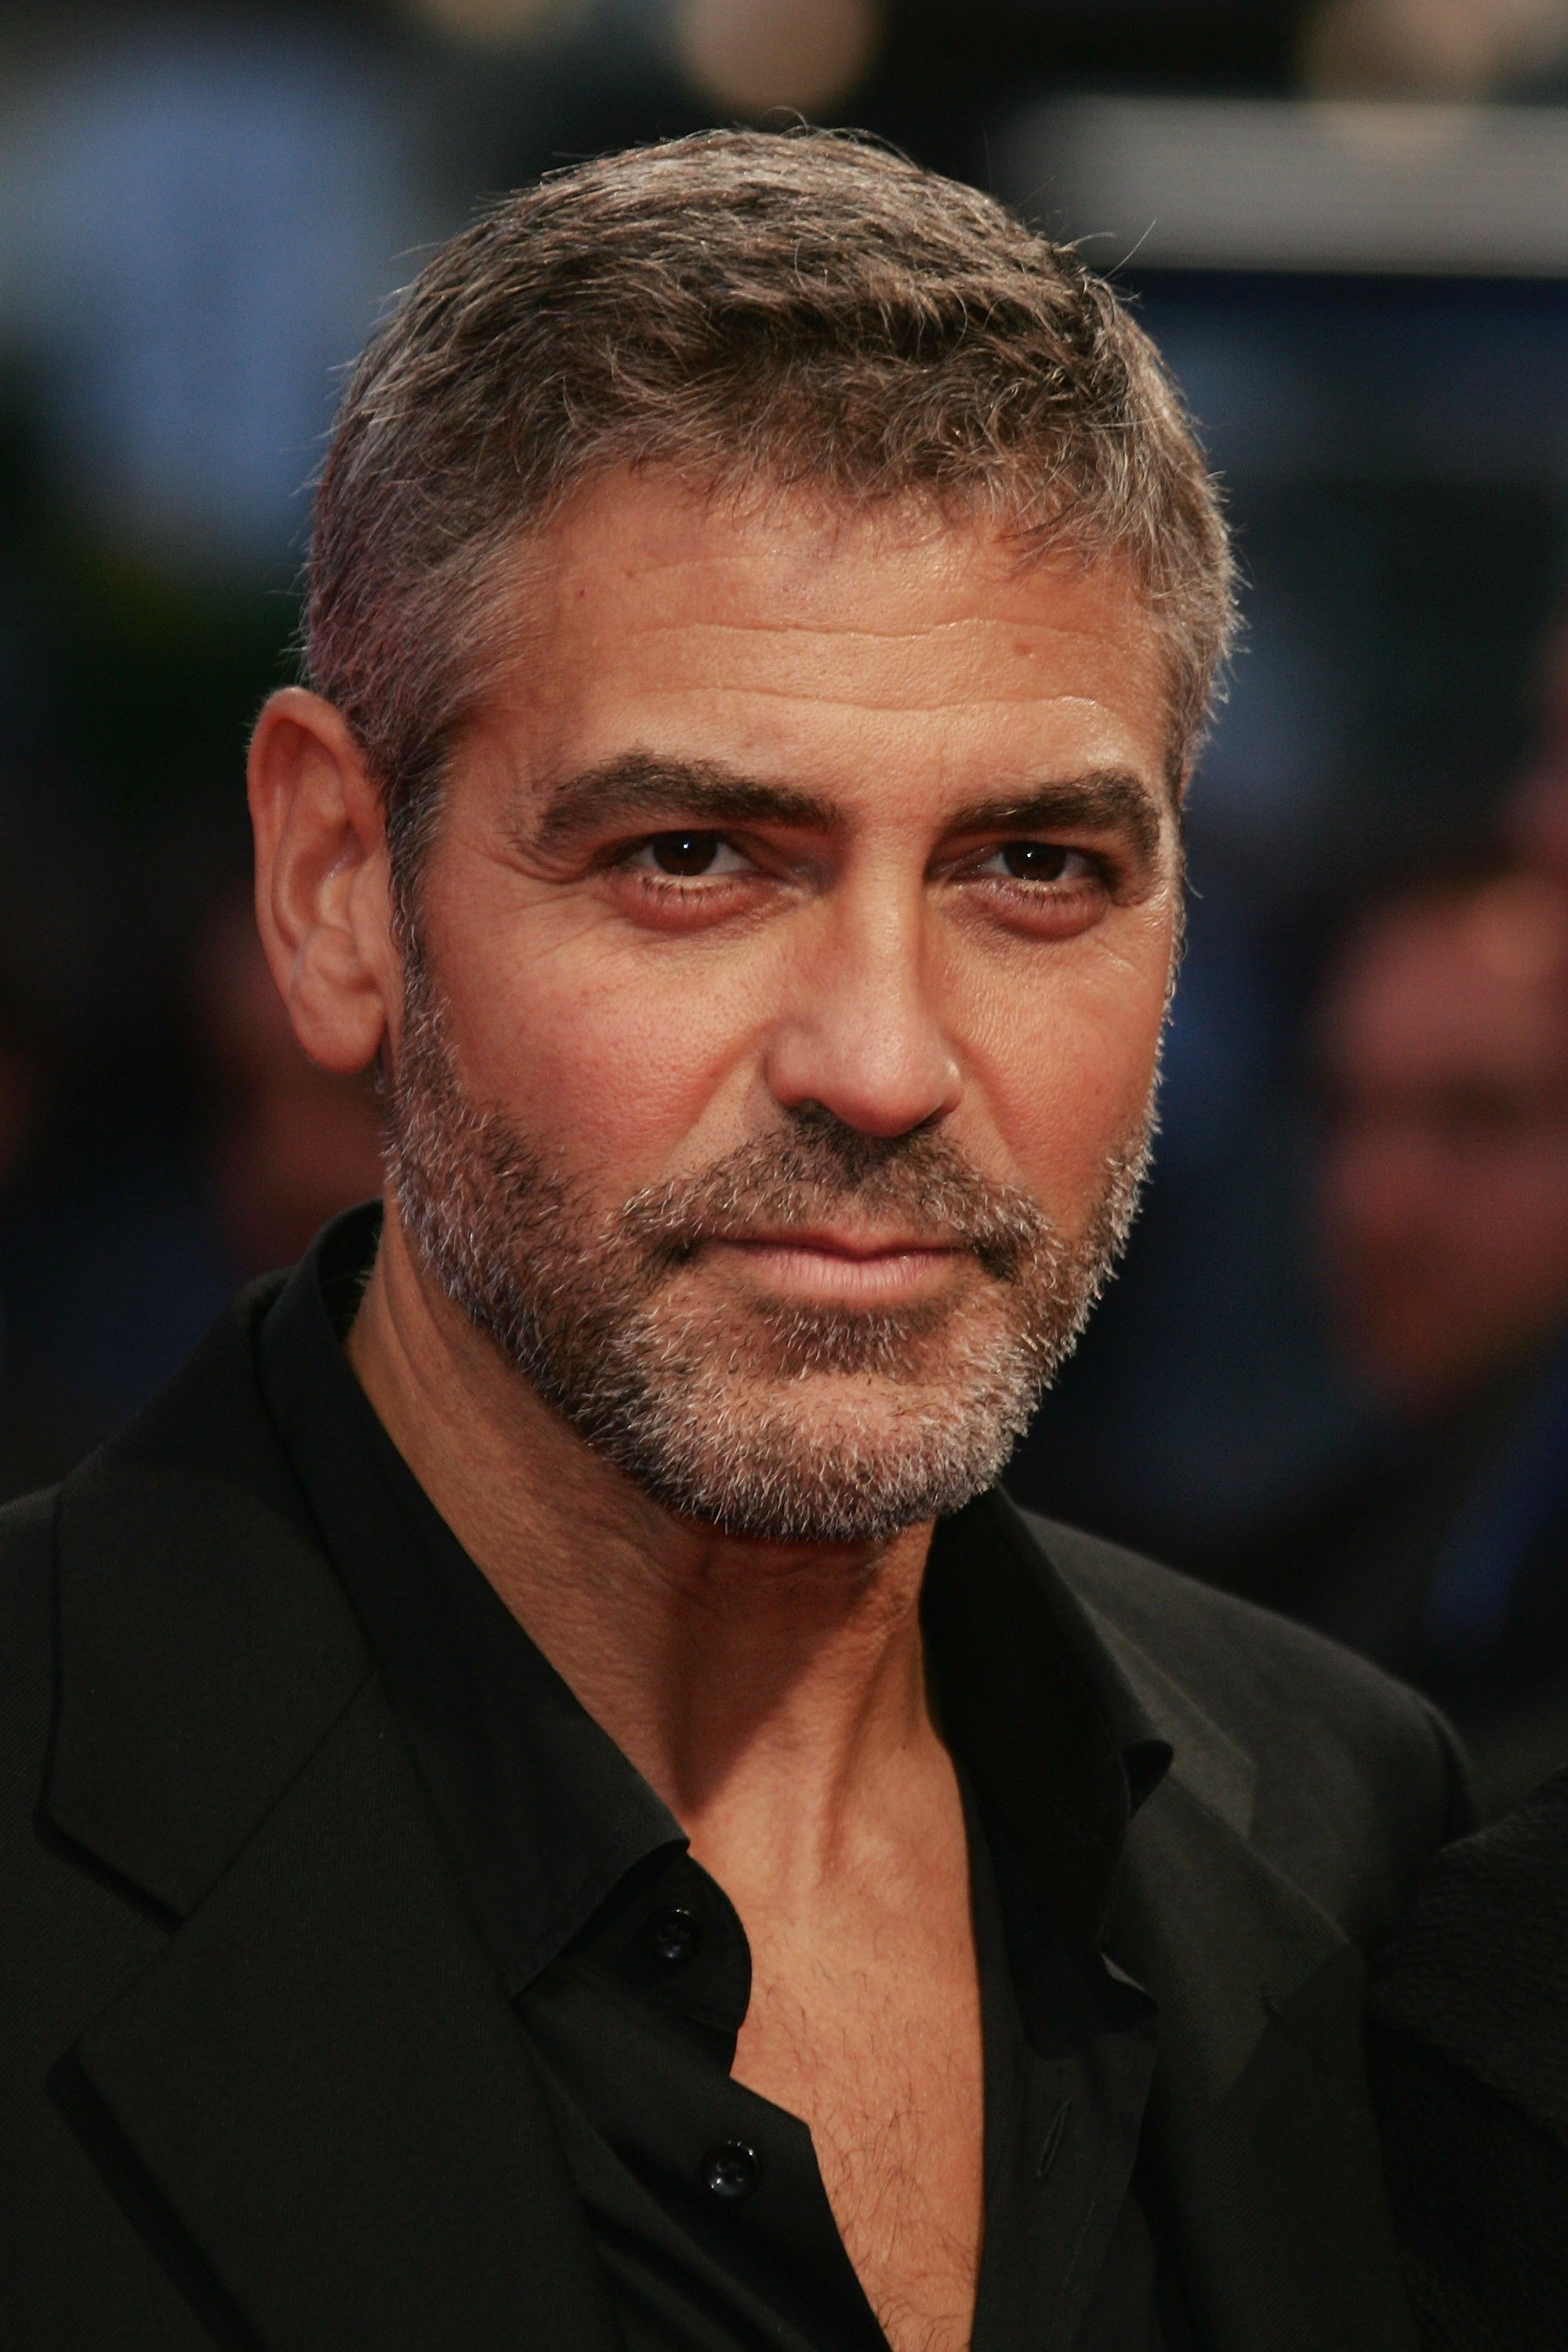 George Clooney attends the premiere of "Michael Clayton" at the 33rd Deauville American Film Festival in France on September 2, 2007 | Photo: Getty Images